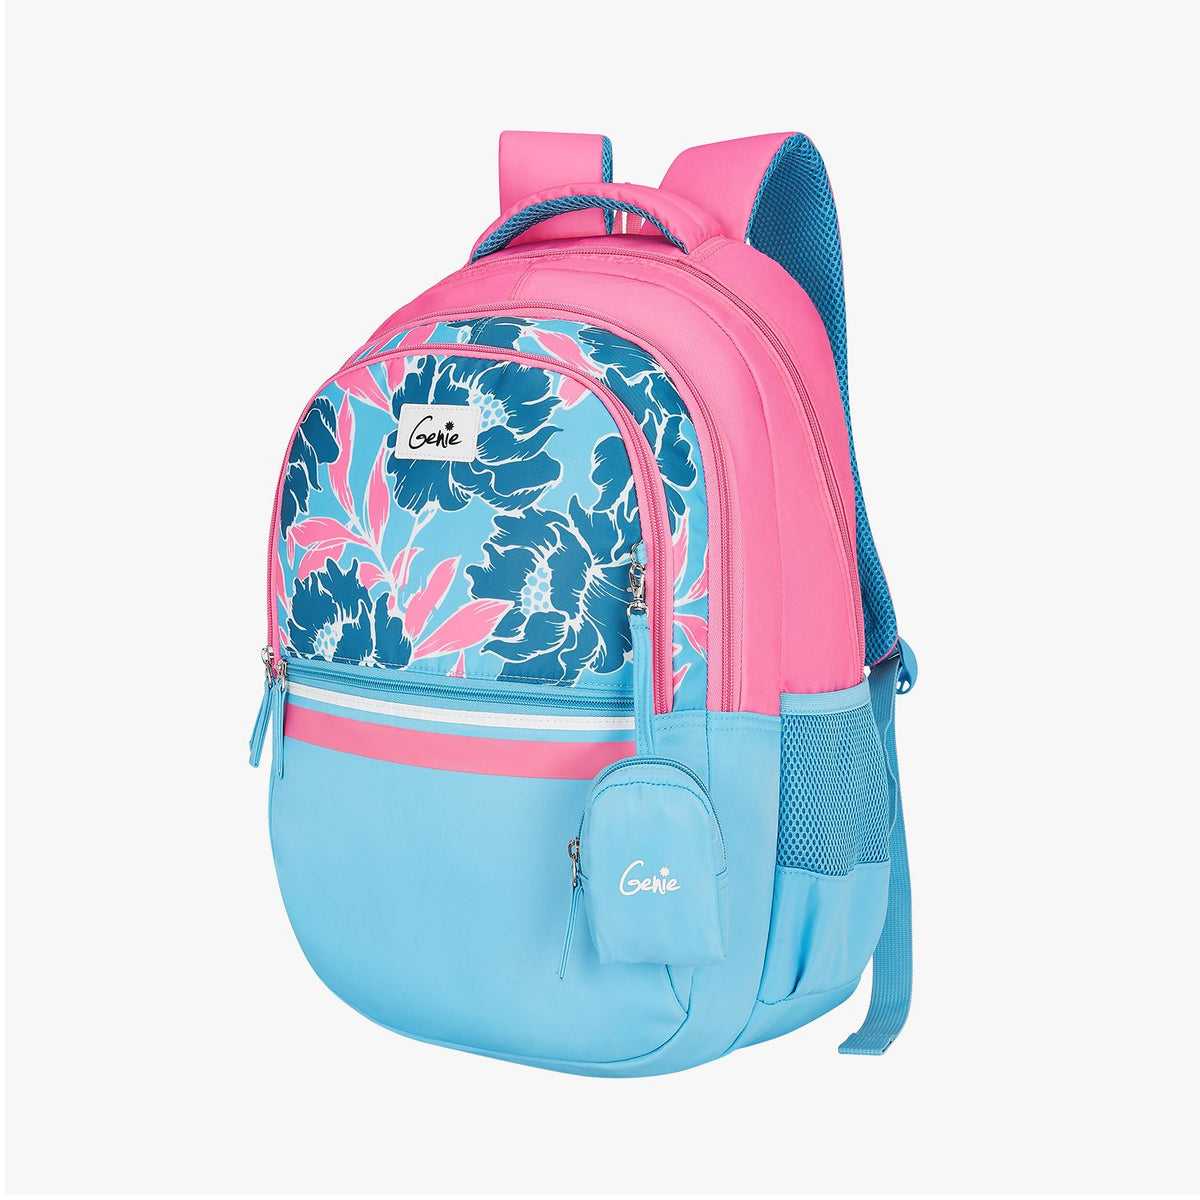 Genie Zoey 36L Pink Laptop Backpack With Laptop Sleeve